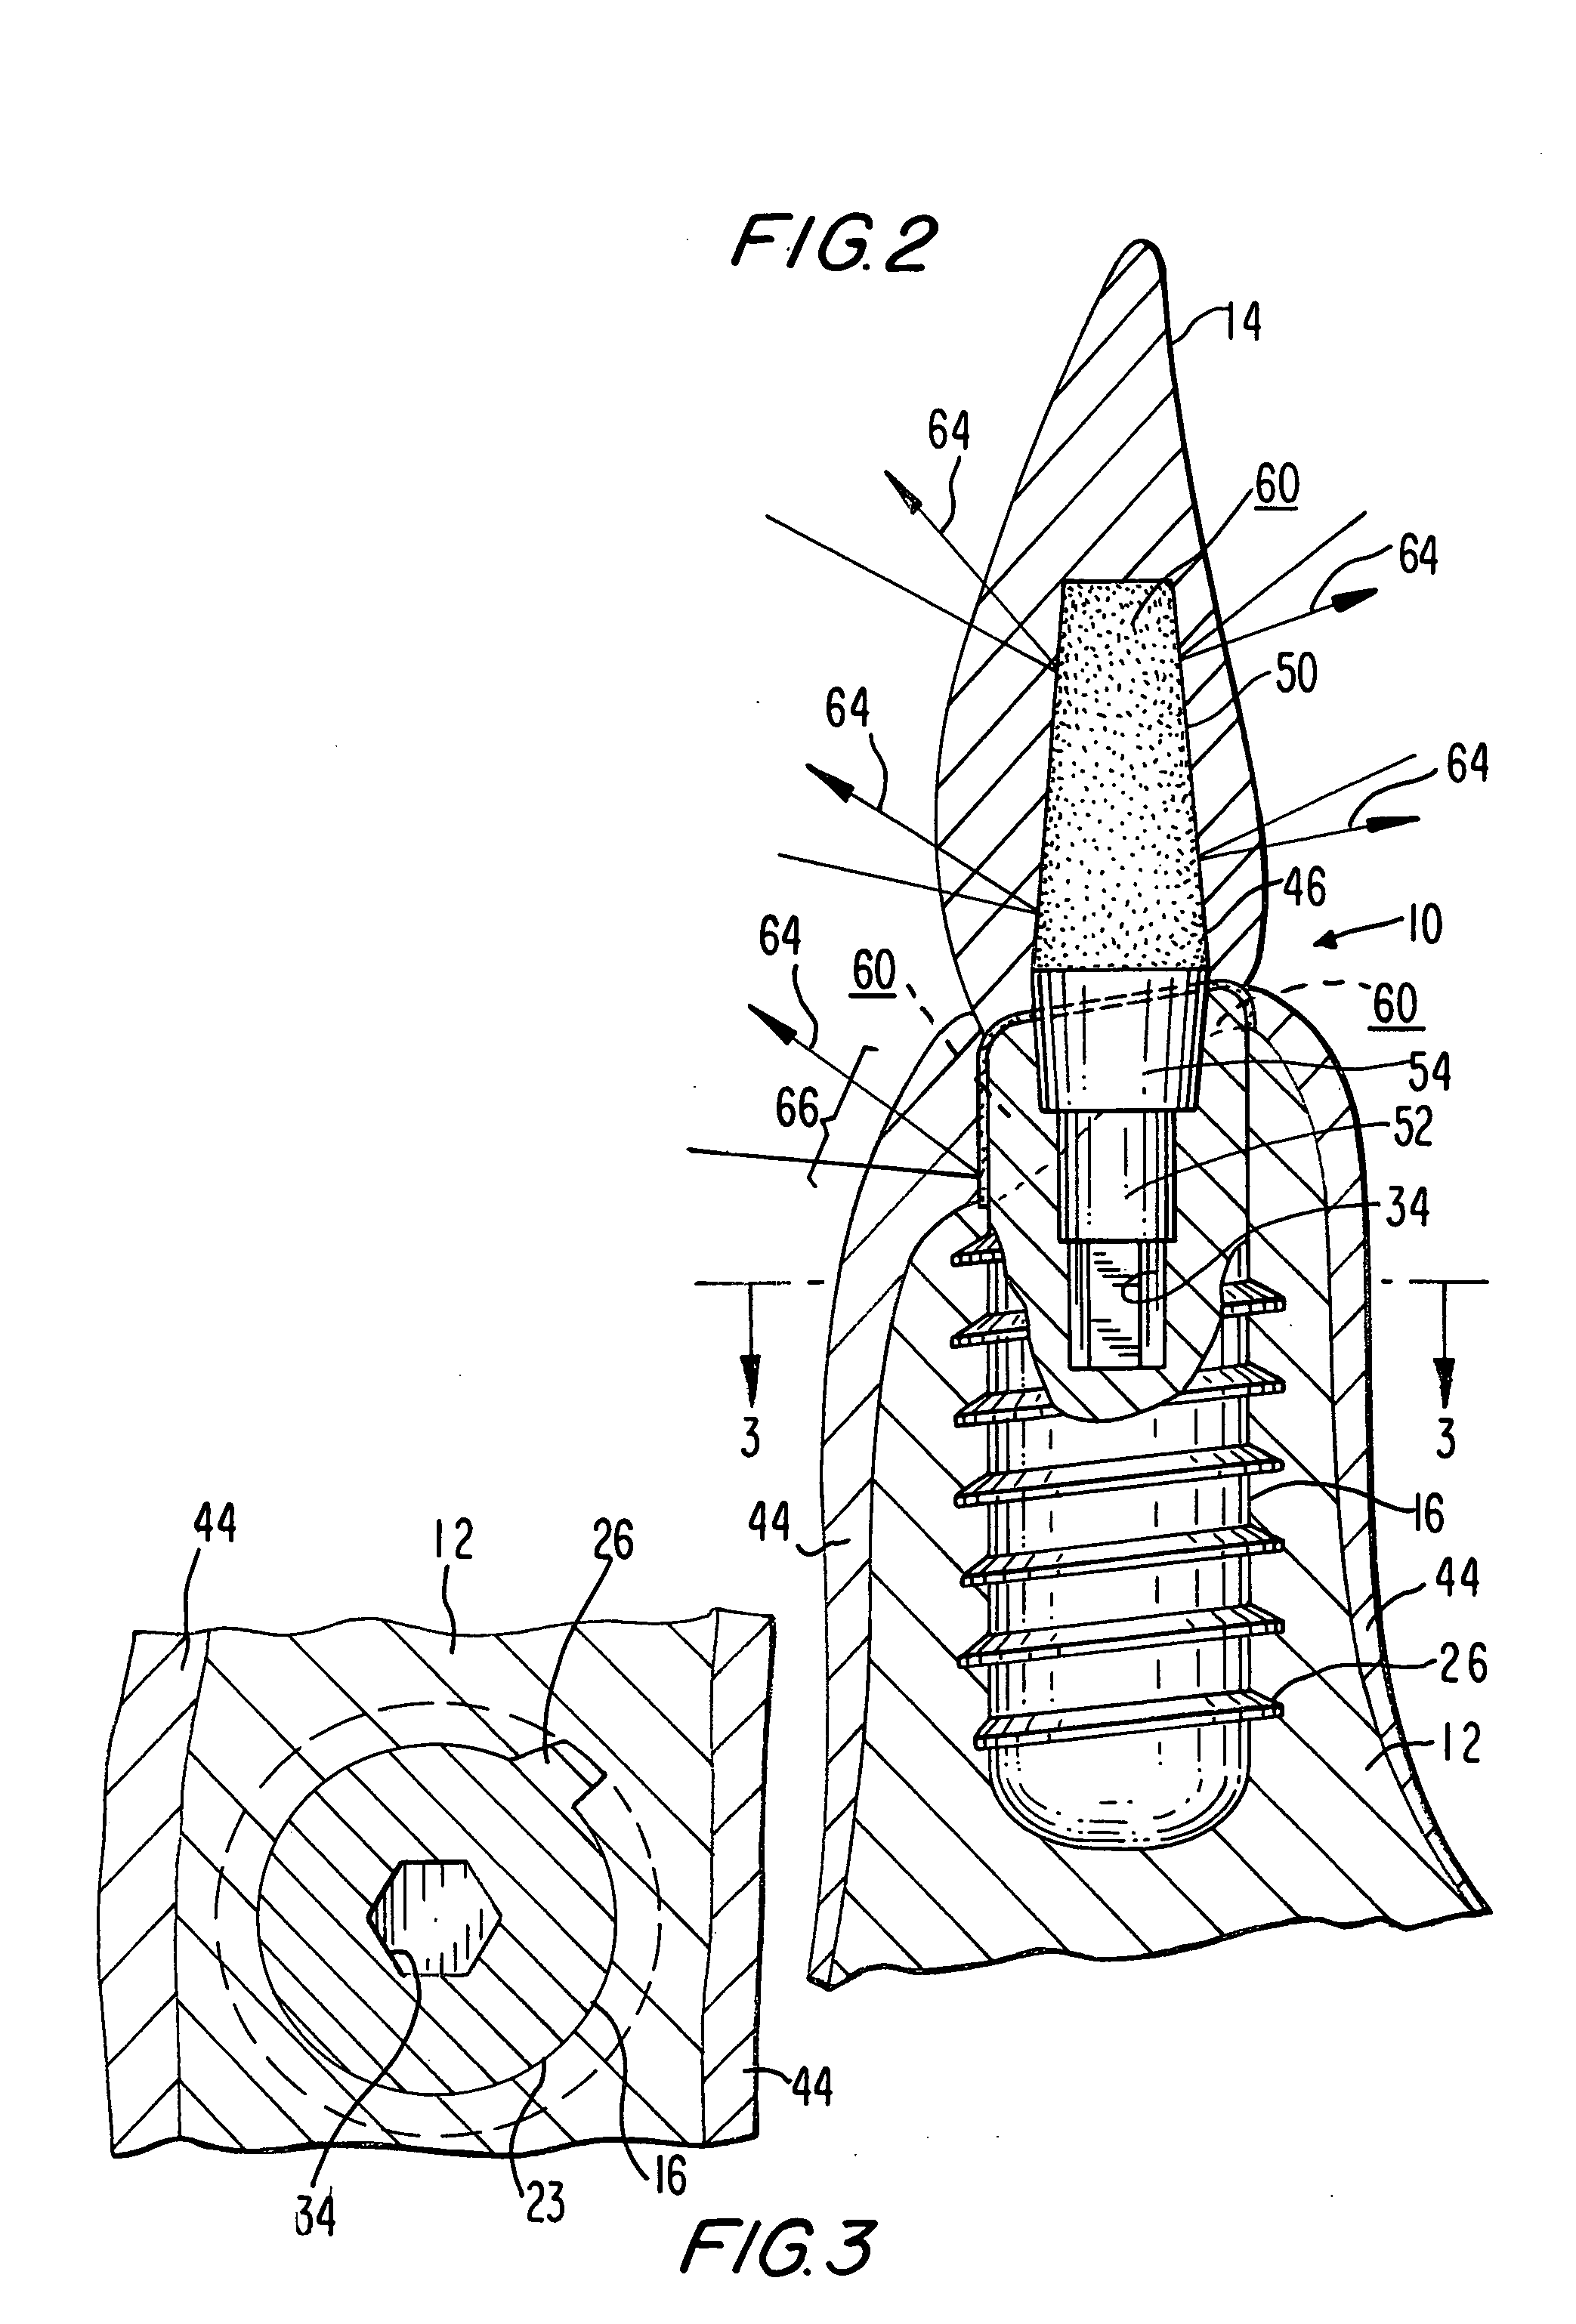 Aesthetic dental implant fixture and abutment system